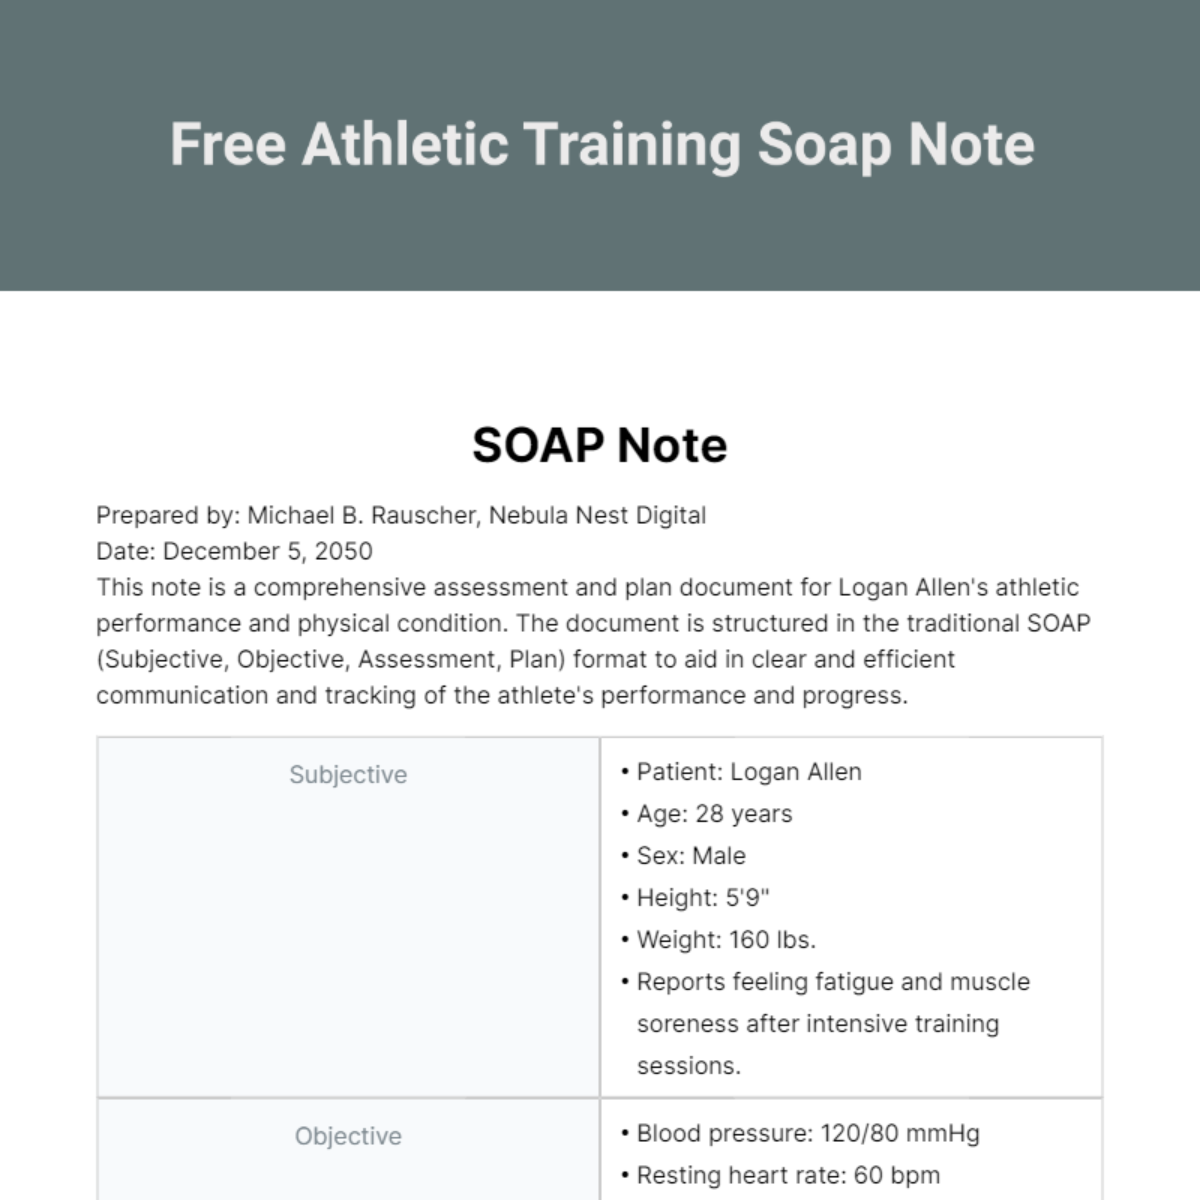 athletic-training-soap-note-edit-online-download-example